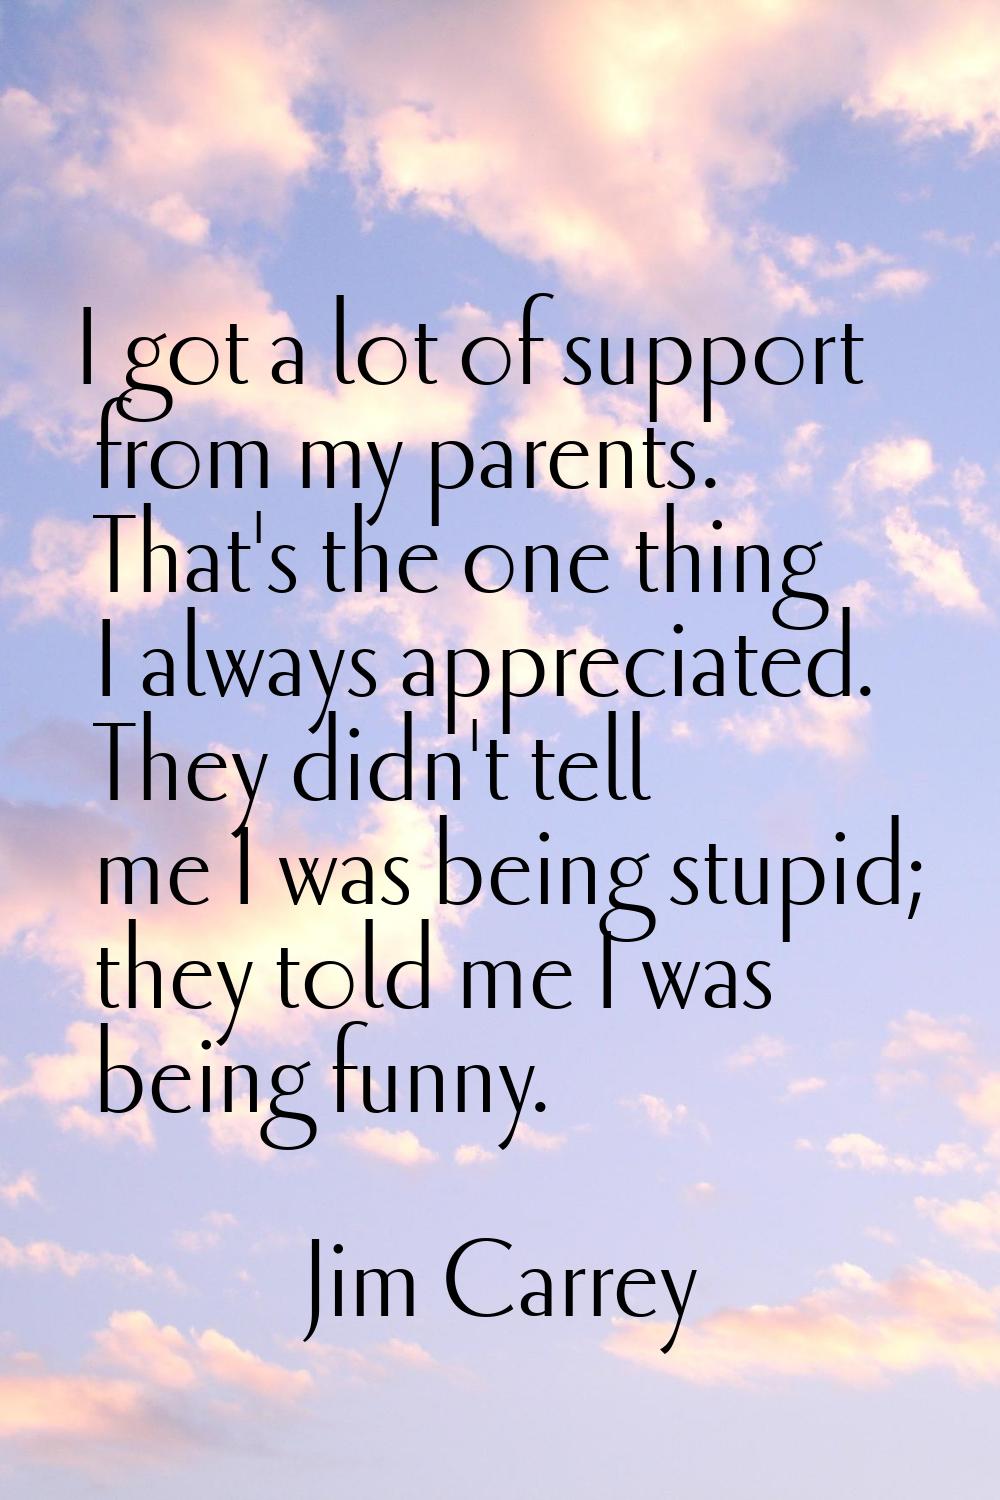 I got a lot of support from my parents. That's the one thing I always appreciated. They didn't tell